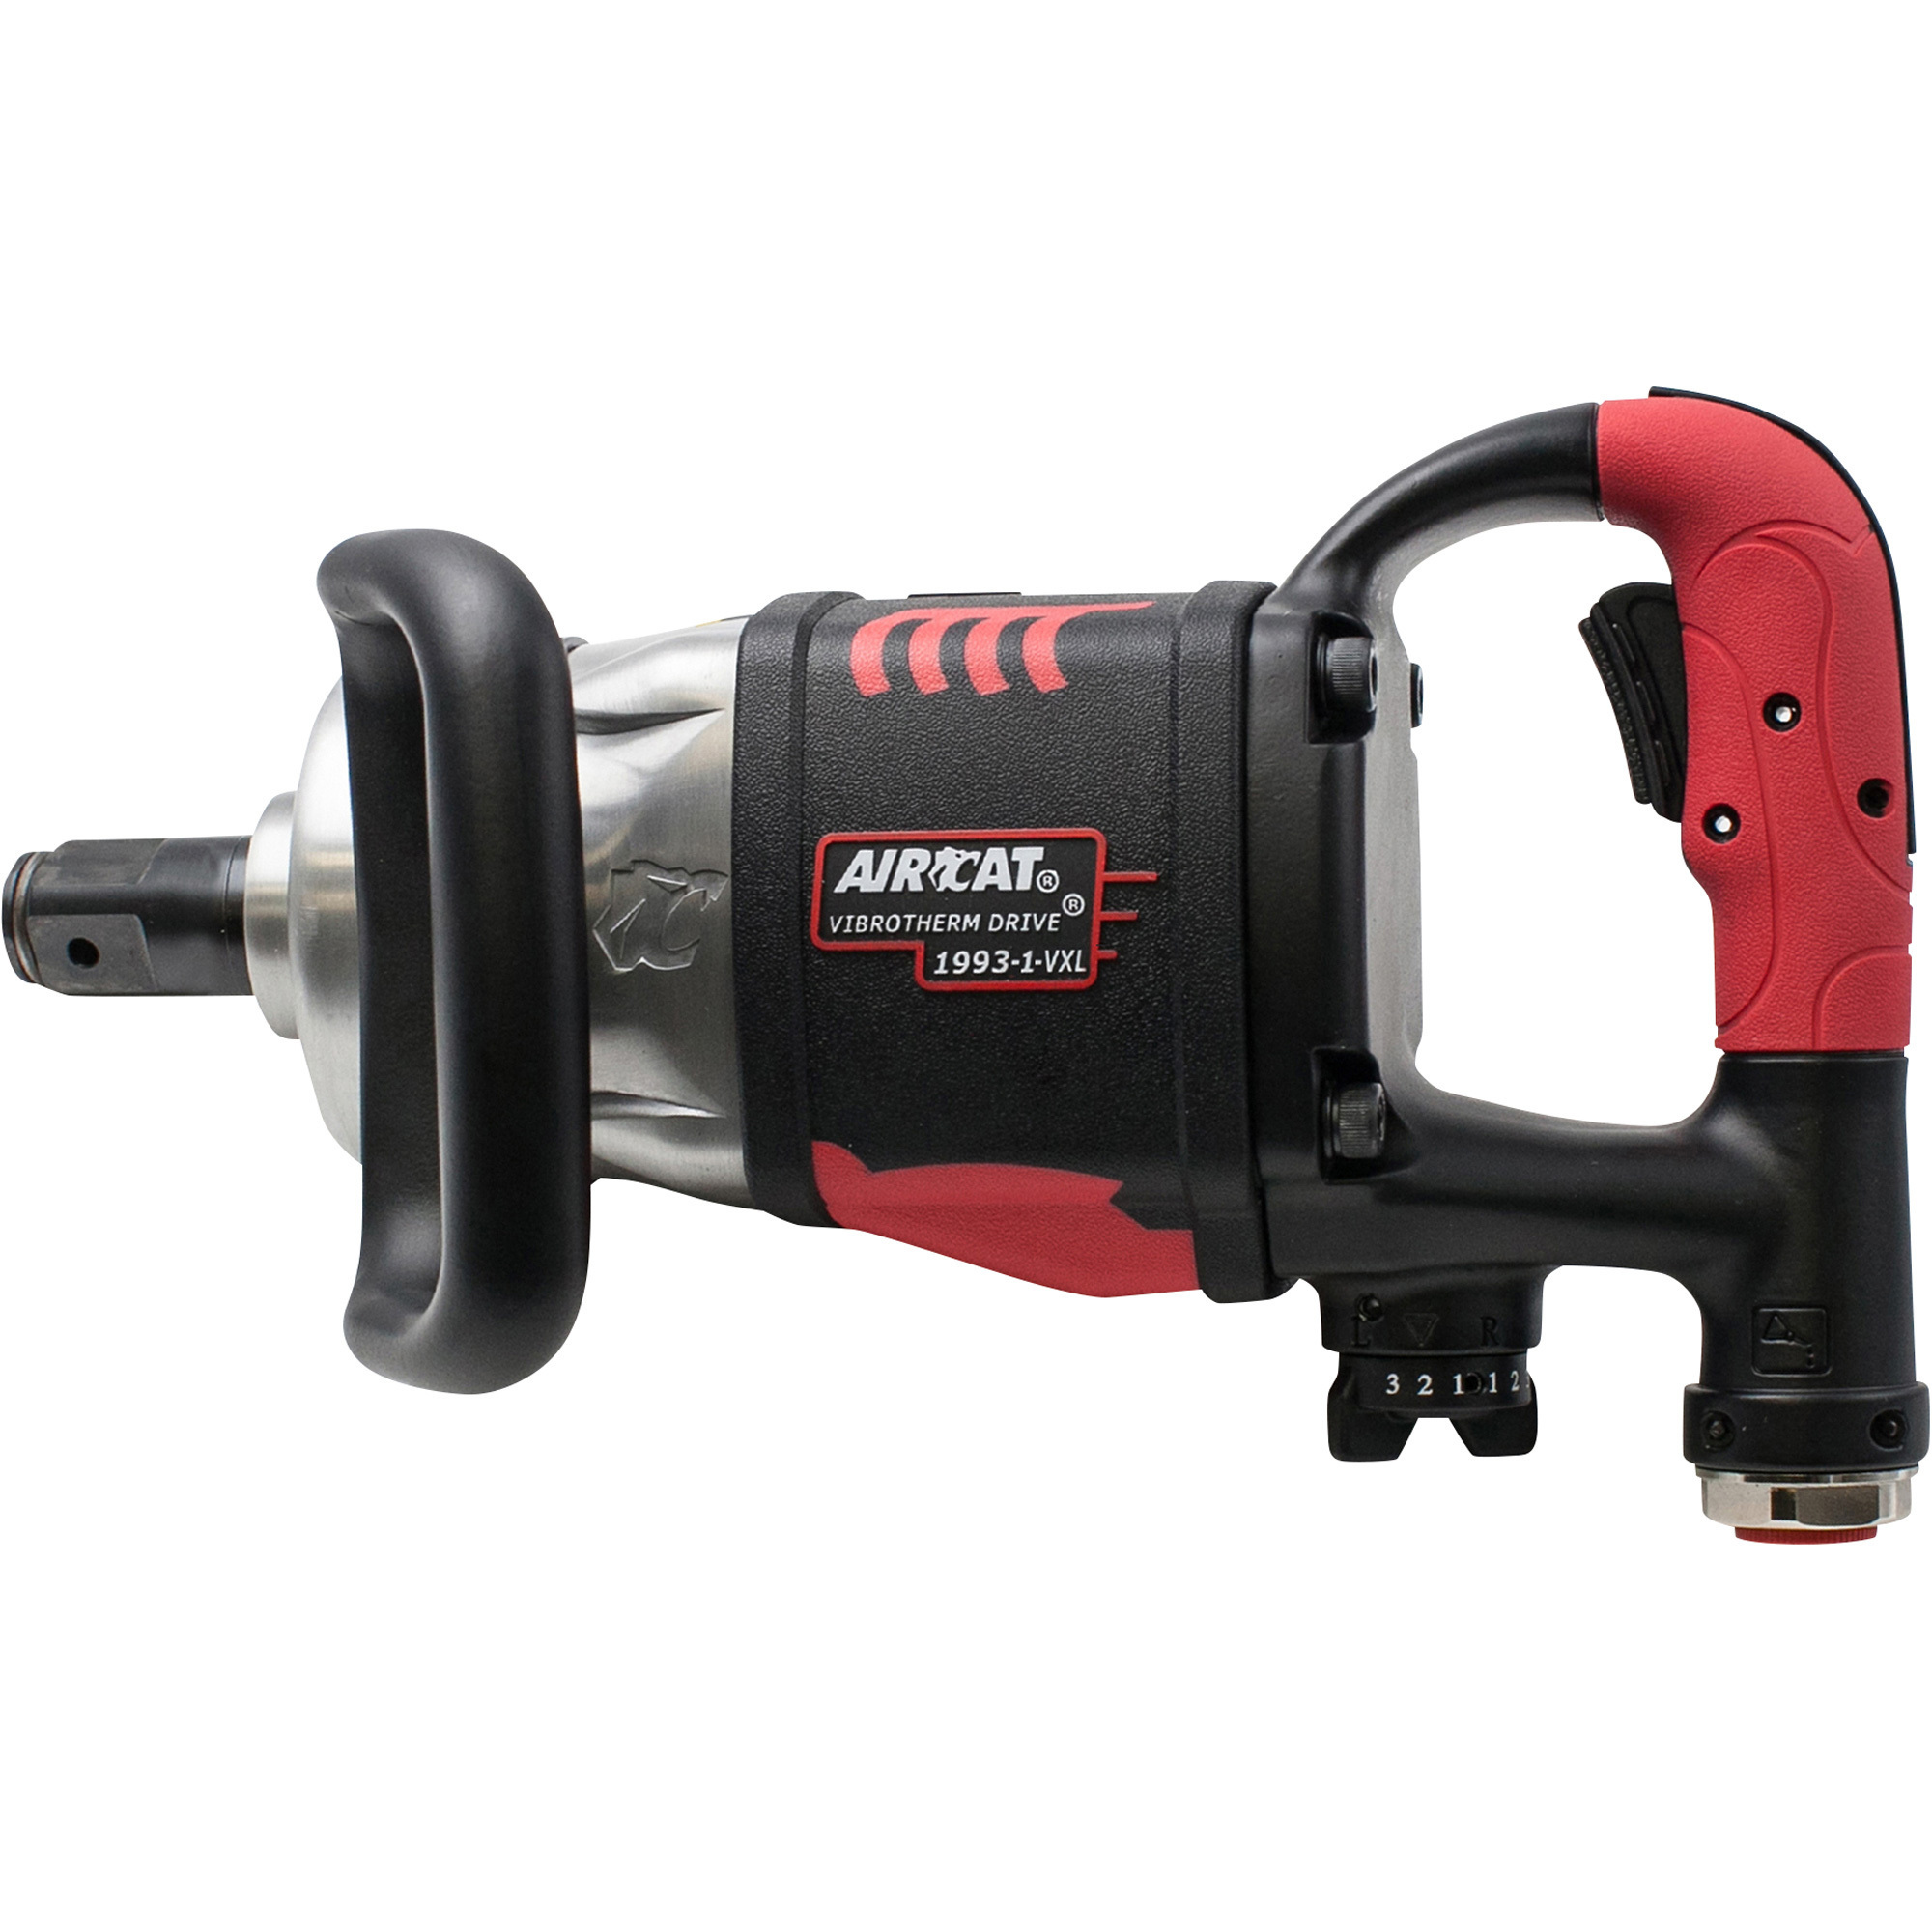 AIRCAT Vibrotherm Drive Composite Air Impact Wrench, 1Inch Drive, 2100 Ft./Lbs. Max. Torque, Model 1993-1-VXL